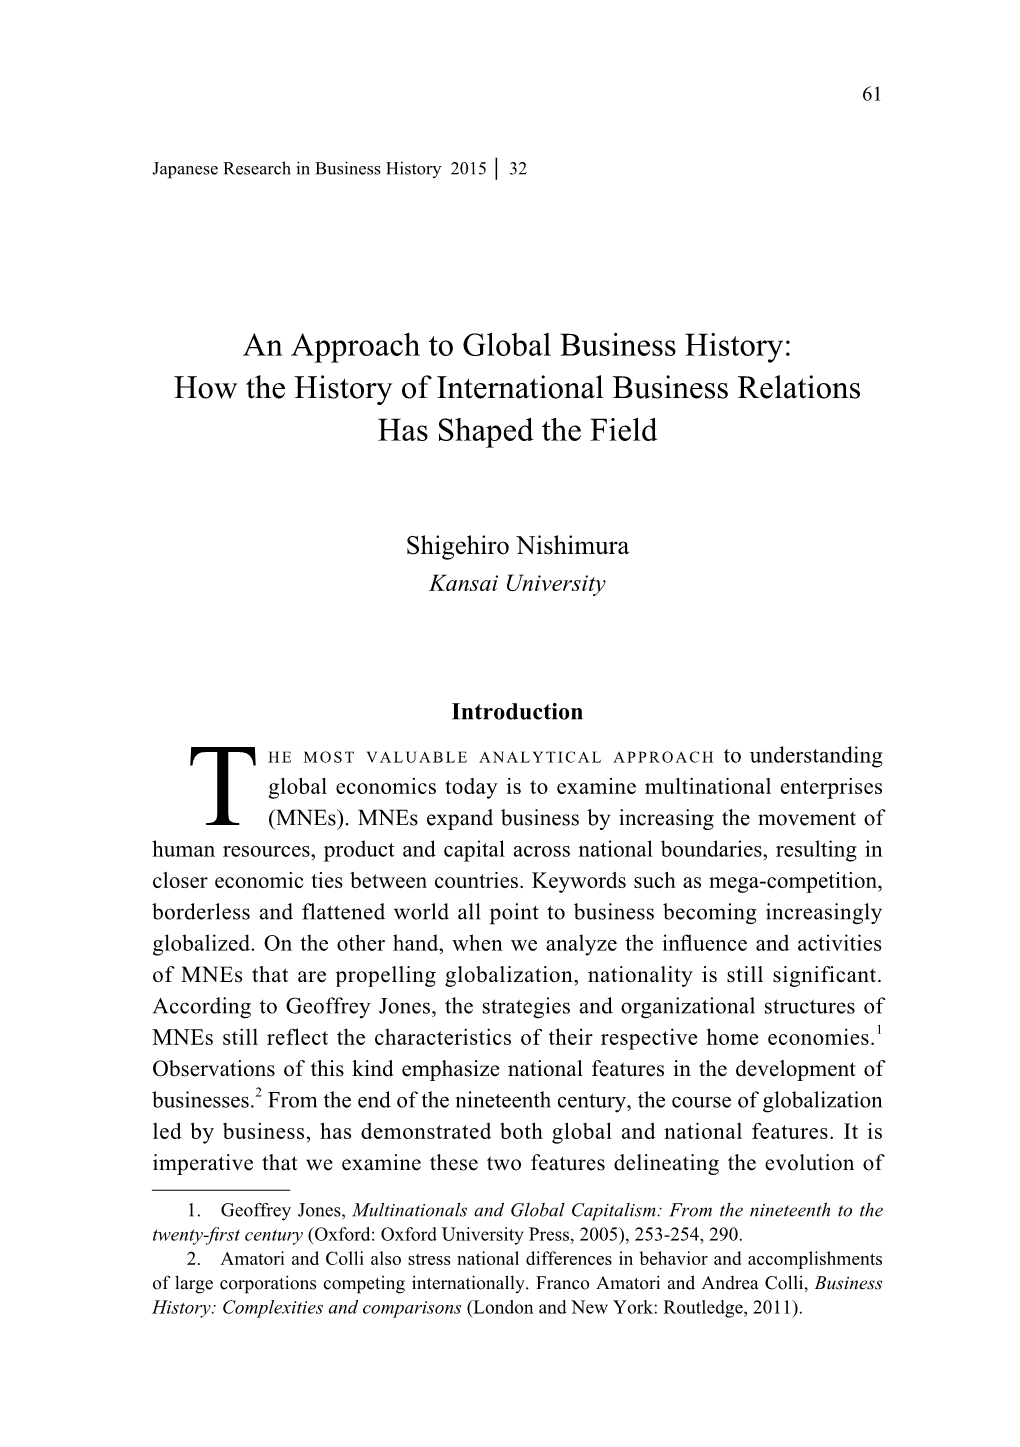 An Approach to Global Business History: How the History of International Business Relations Has Shaped the Field